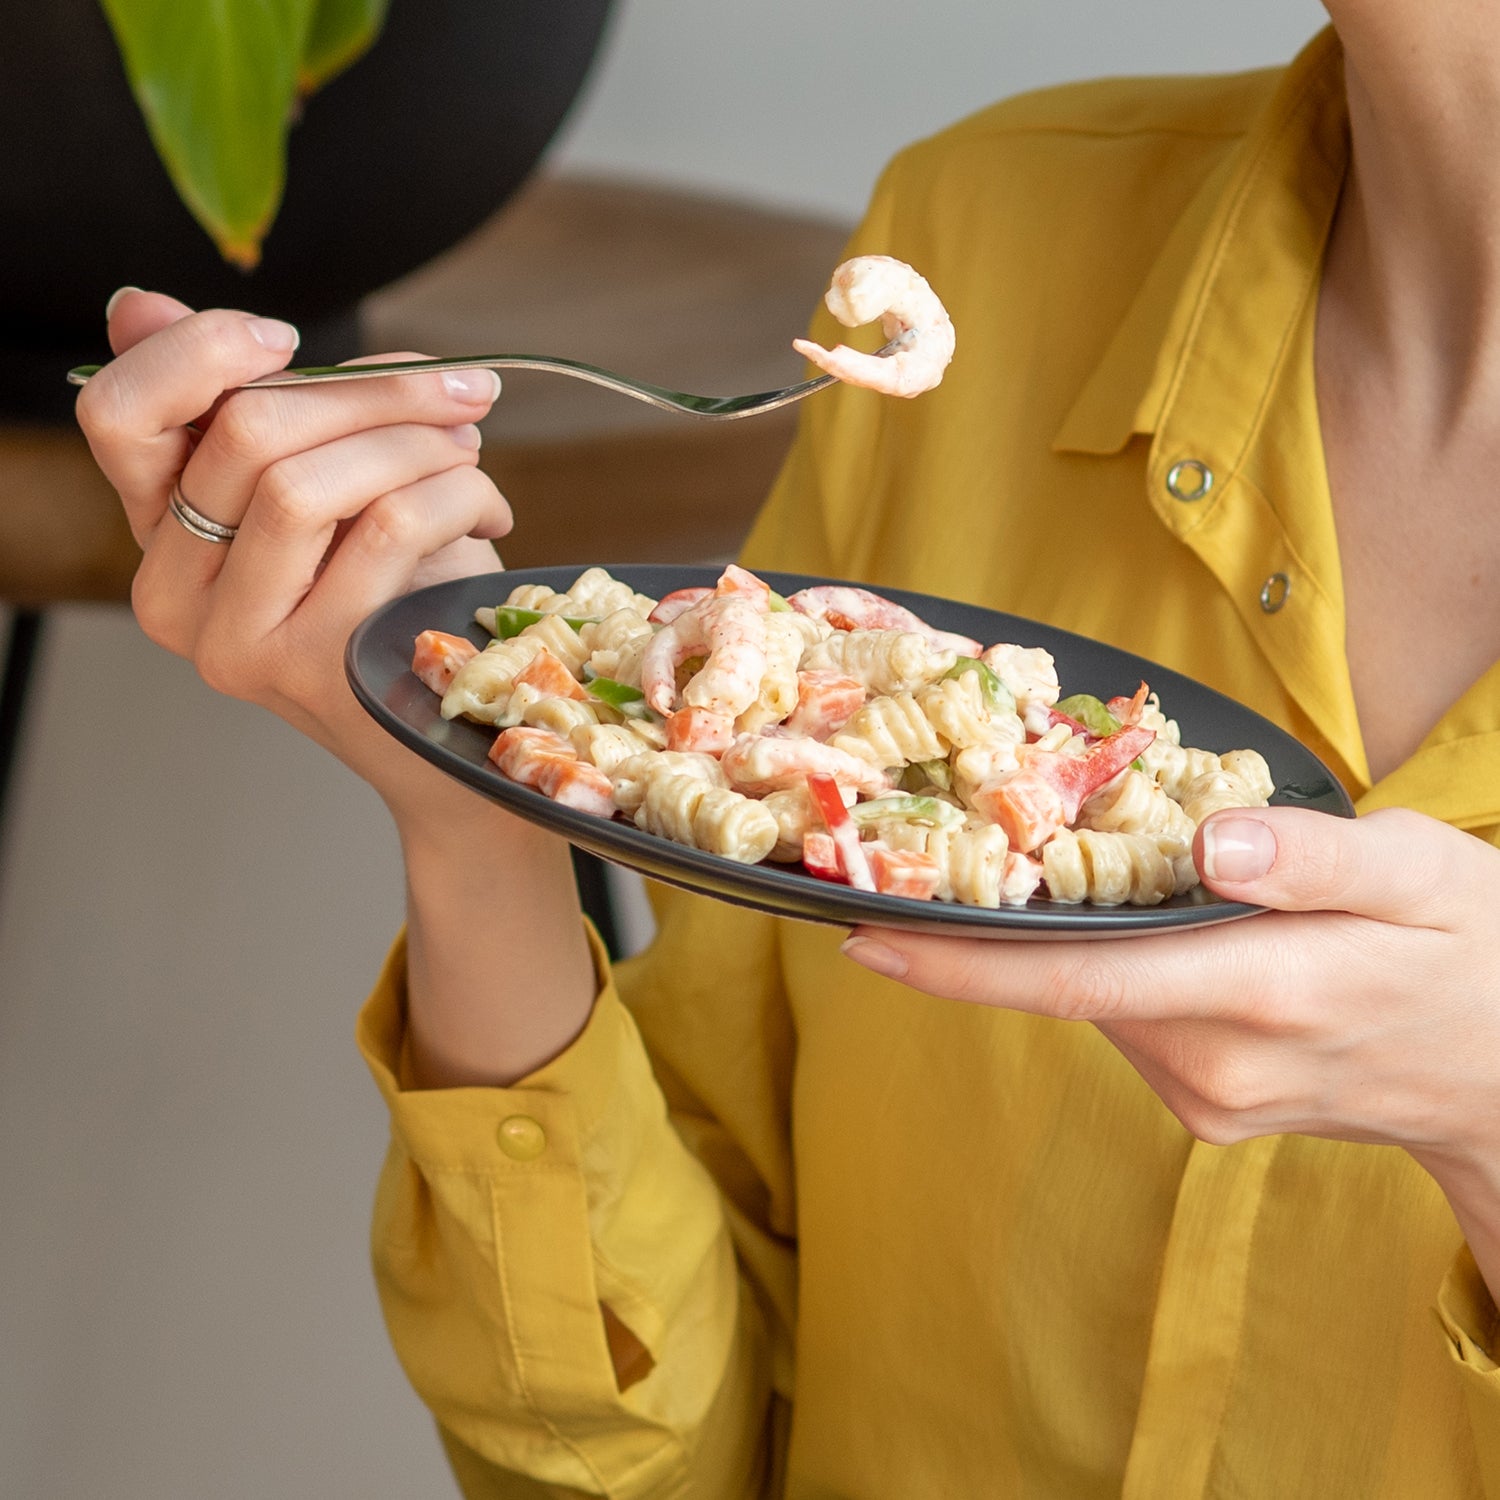 The Rise of Private Label Foods: A Look into Ready-Made Pasta Salad and Salad Wholesale Options